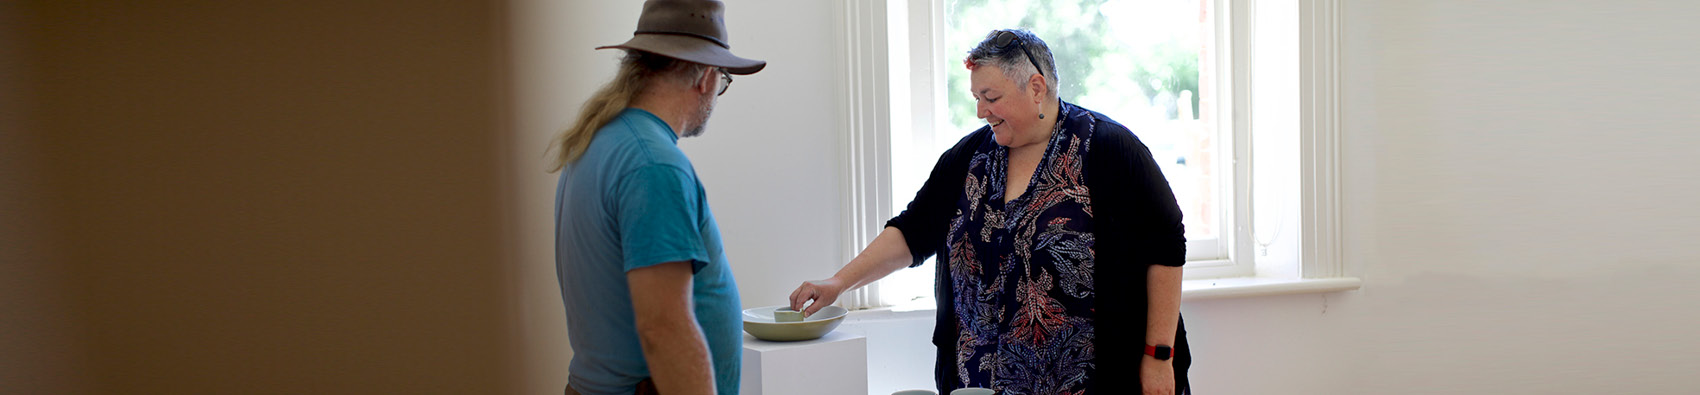 Two people in a community arts gallery. One person is touching an artwork on a wooden pedestal. 